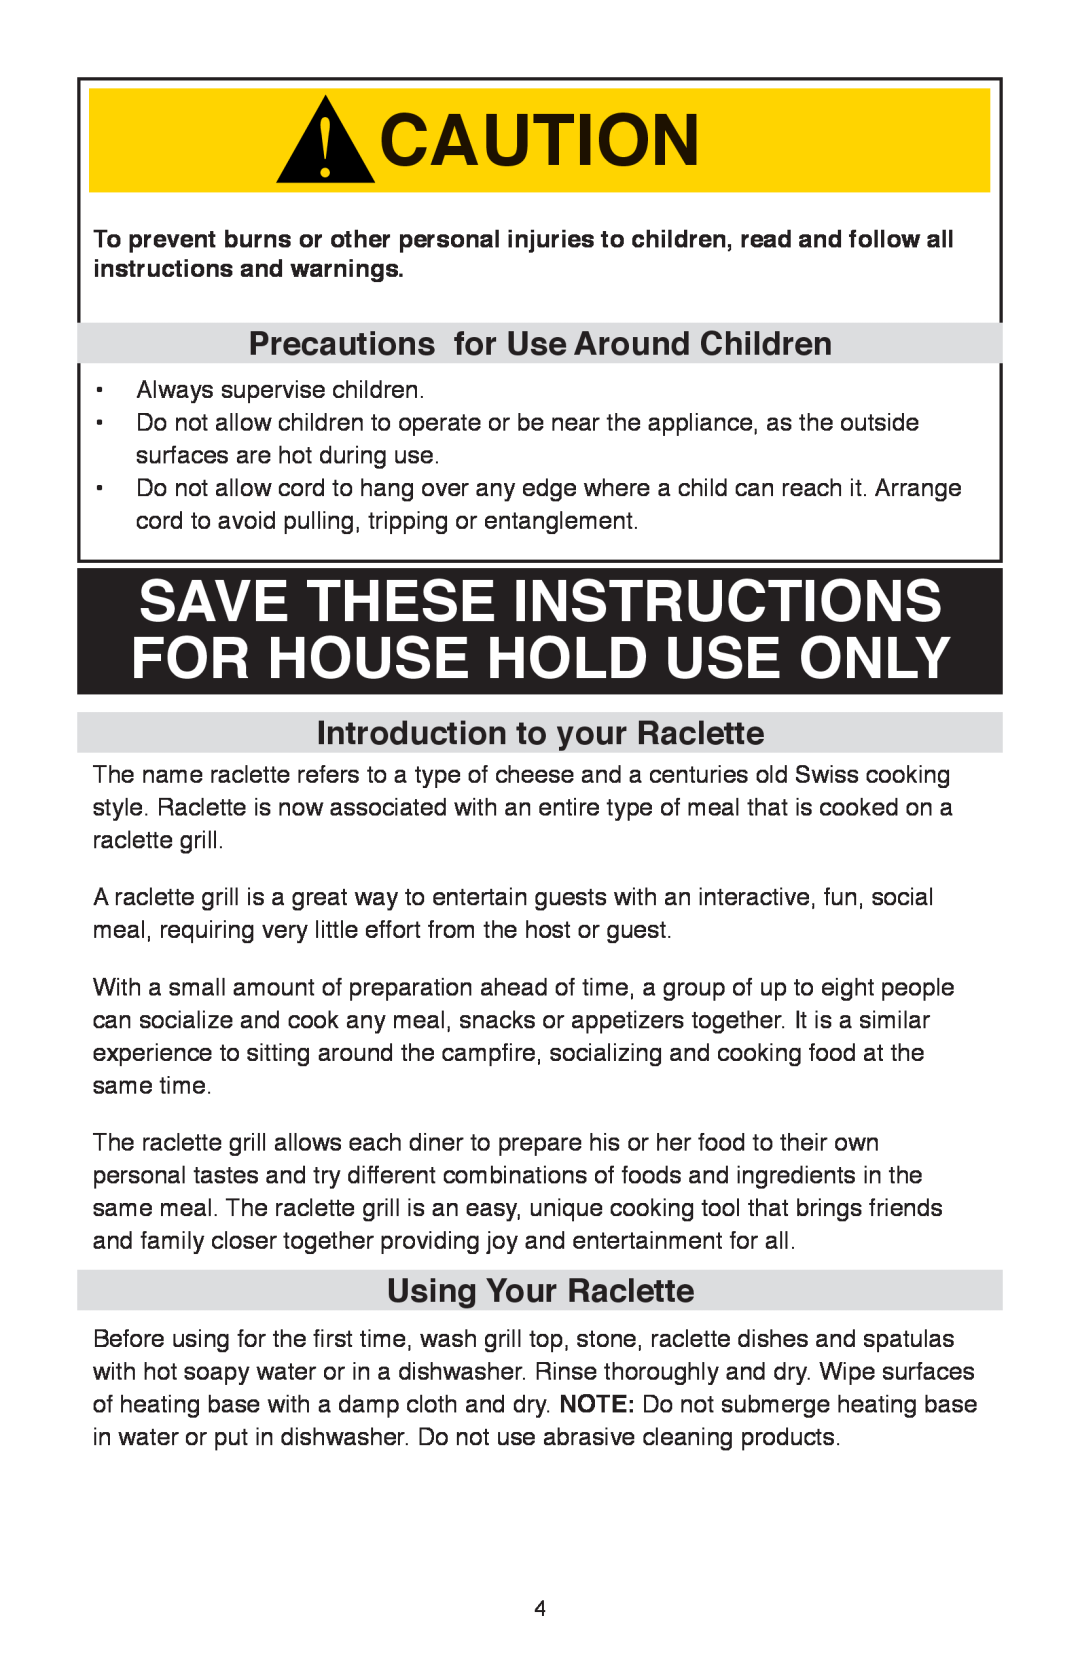 West Bend Model 6130 Save These Instructions For House Hold Use Only, Precautions for Use Around Children 